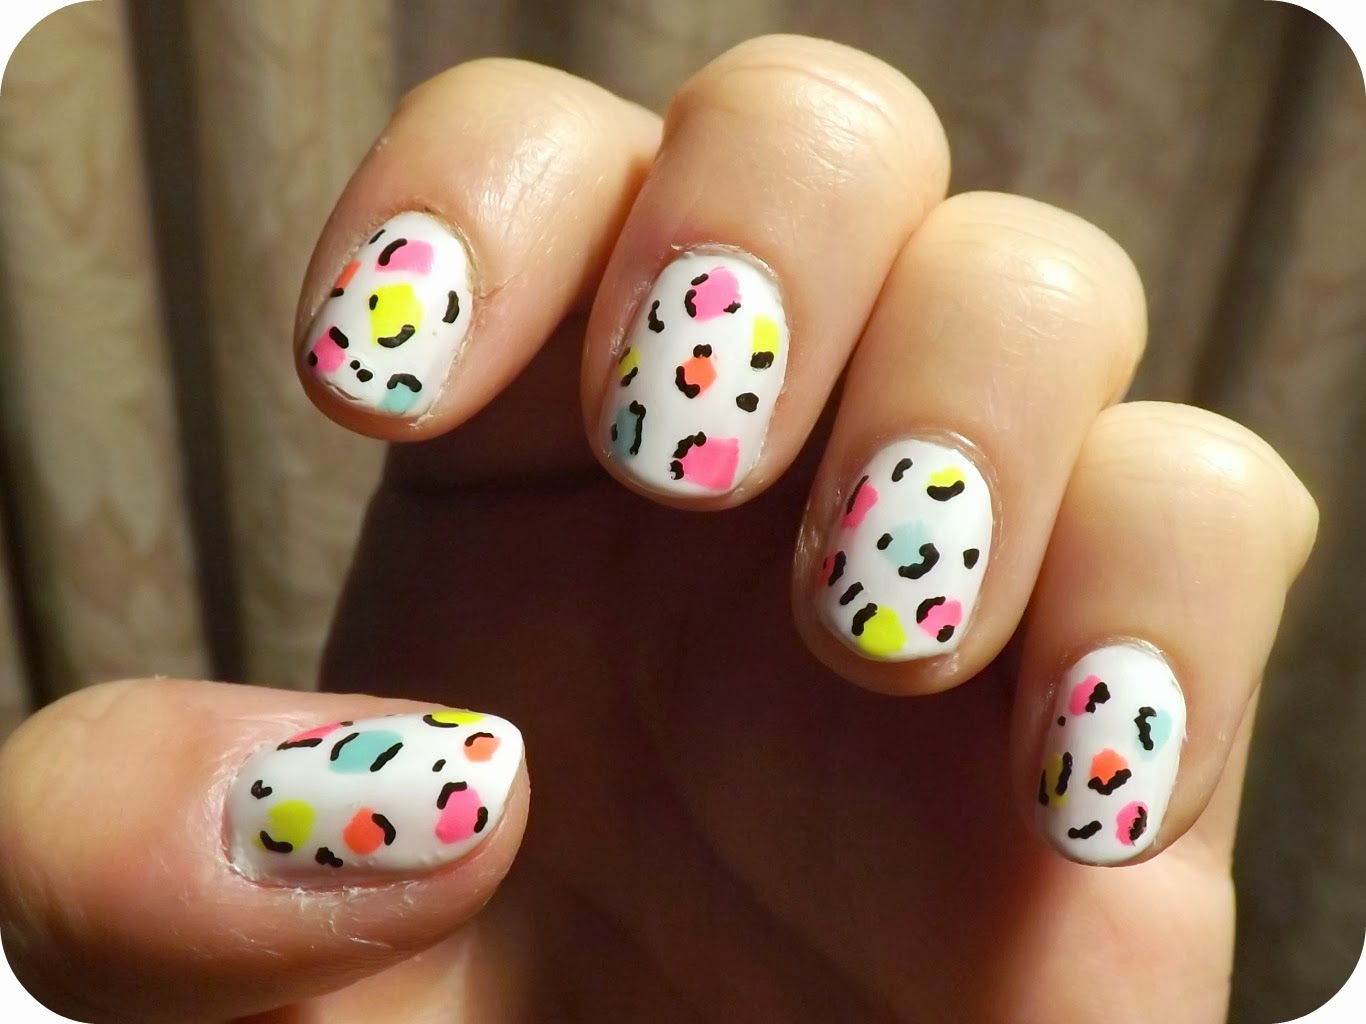 I Scream Nails: 50 of the Coolest DIY Nail Art Designs - wide 2